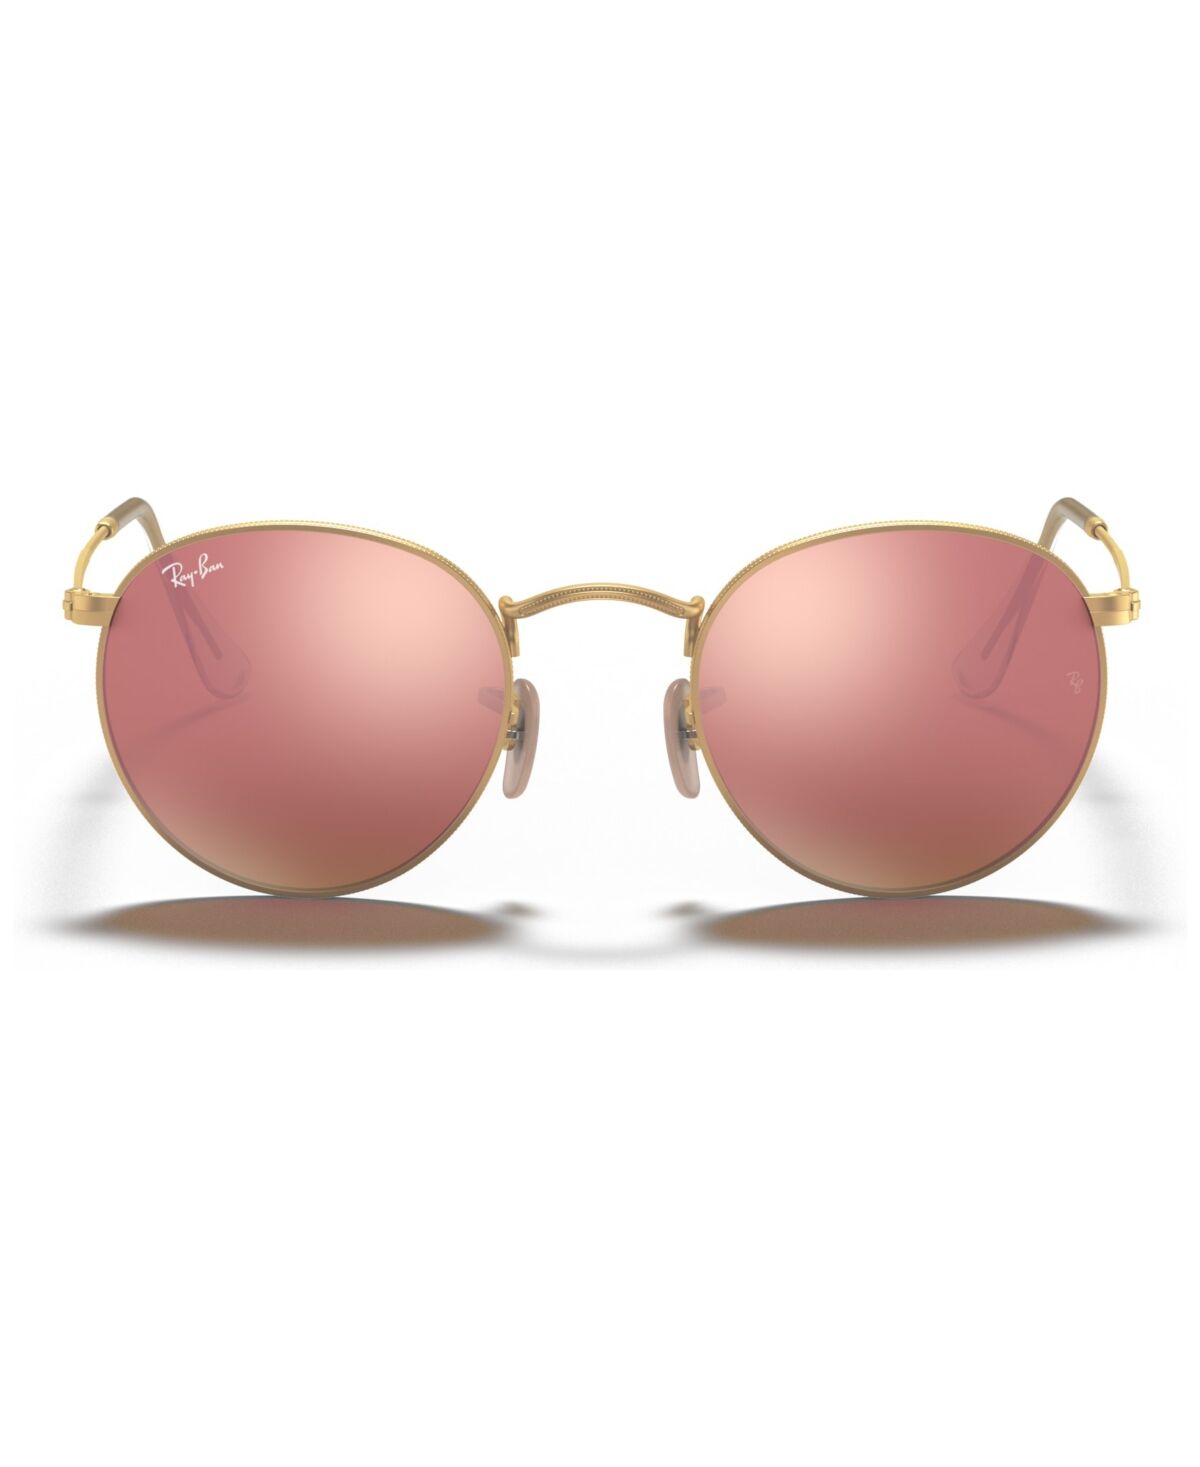 Ray-Ban Sunglasses, RB3447 Round Flash Lenses - GOLD MATTE/PINK MIRROR